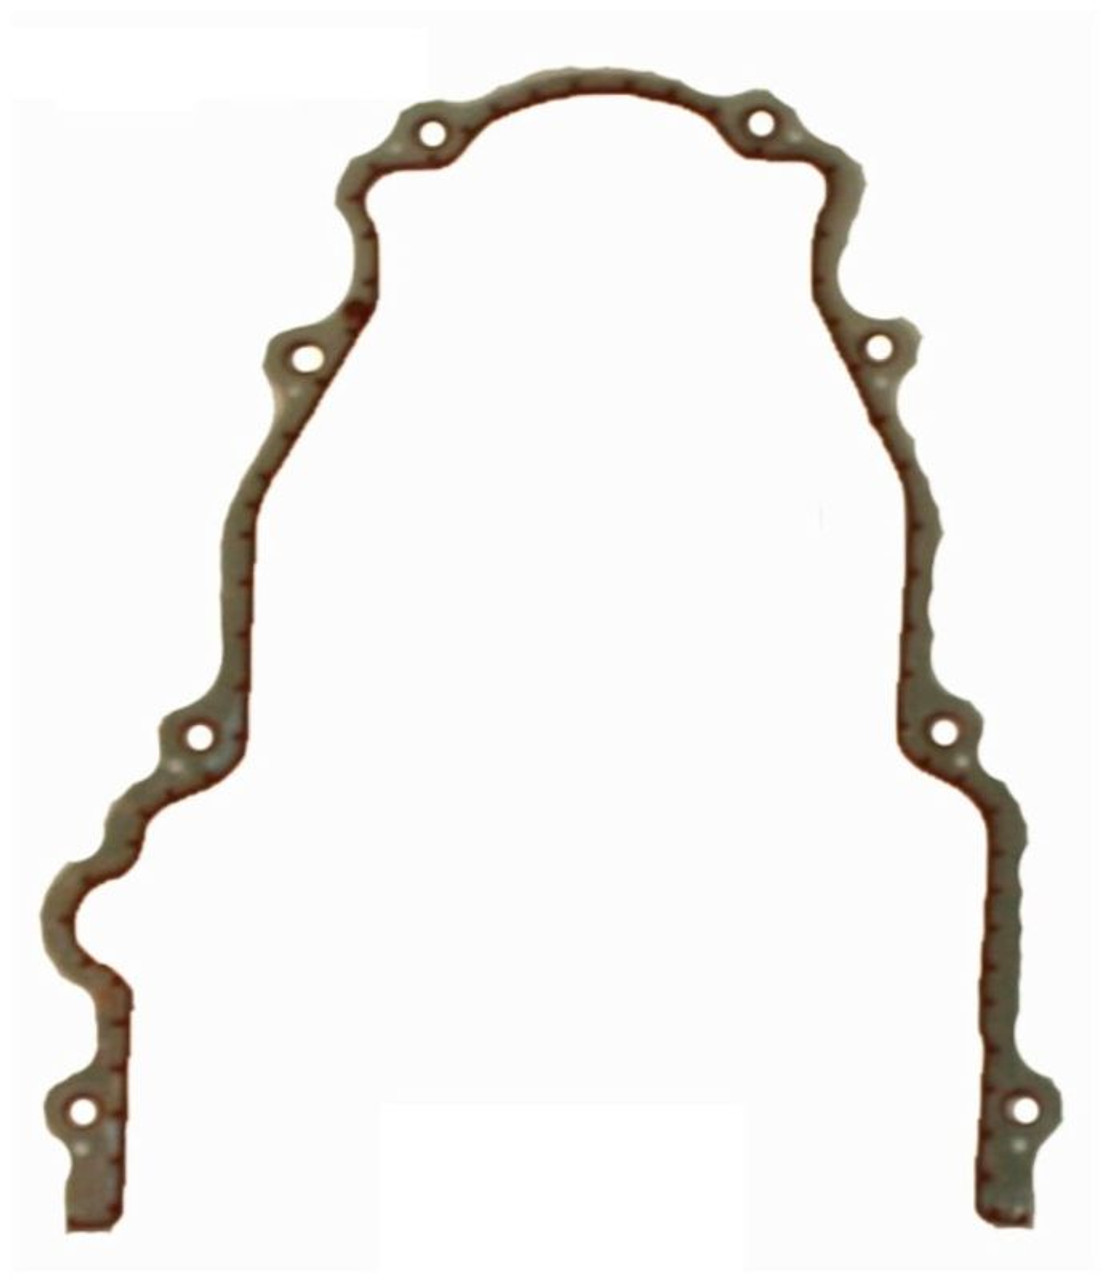 2009 Chevrolet Impala 5.3L Engine Timing Cover Gasket TCG293-A -560